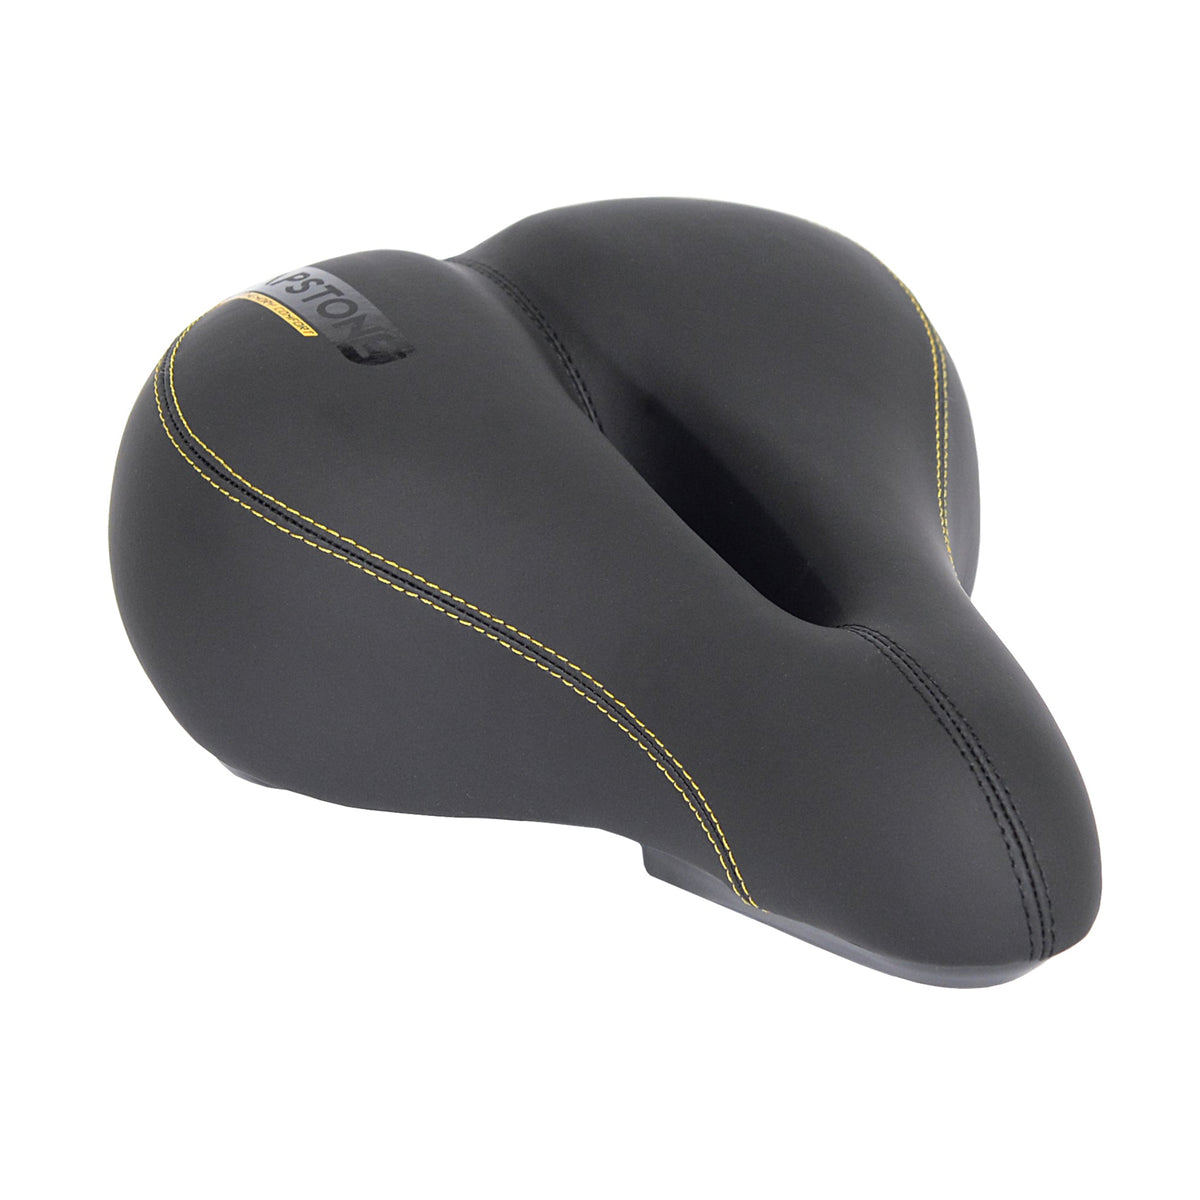 Capstone Memory Comfort Relieved Saddle | Fits Most Adult Bikes